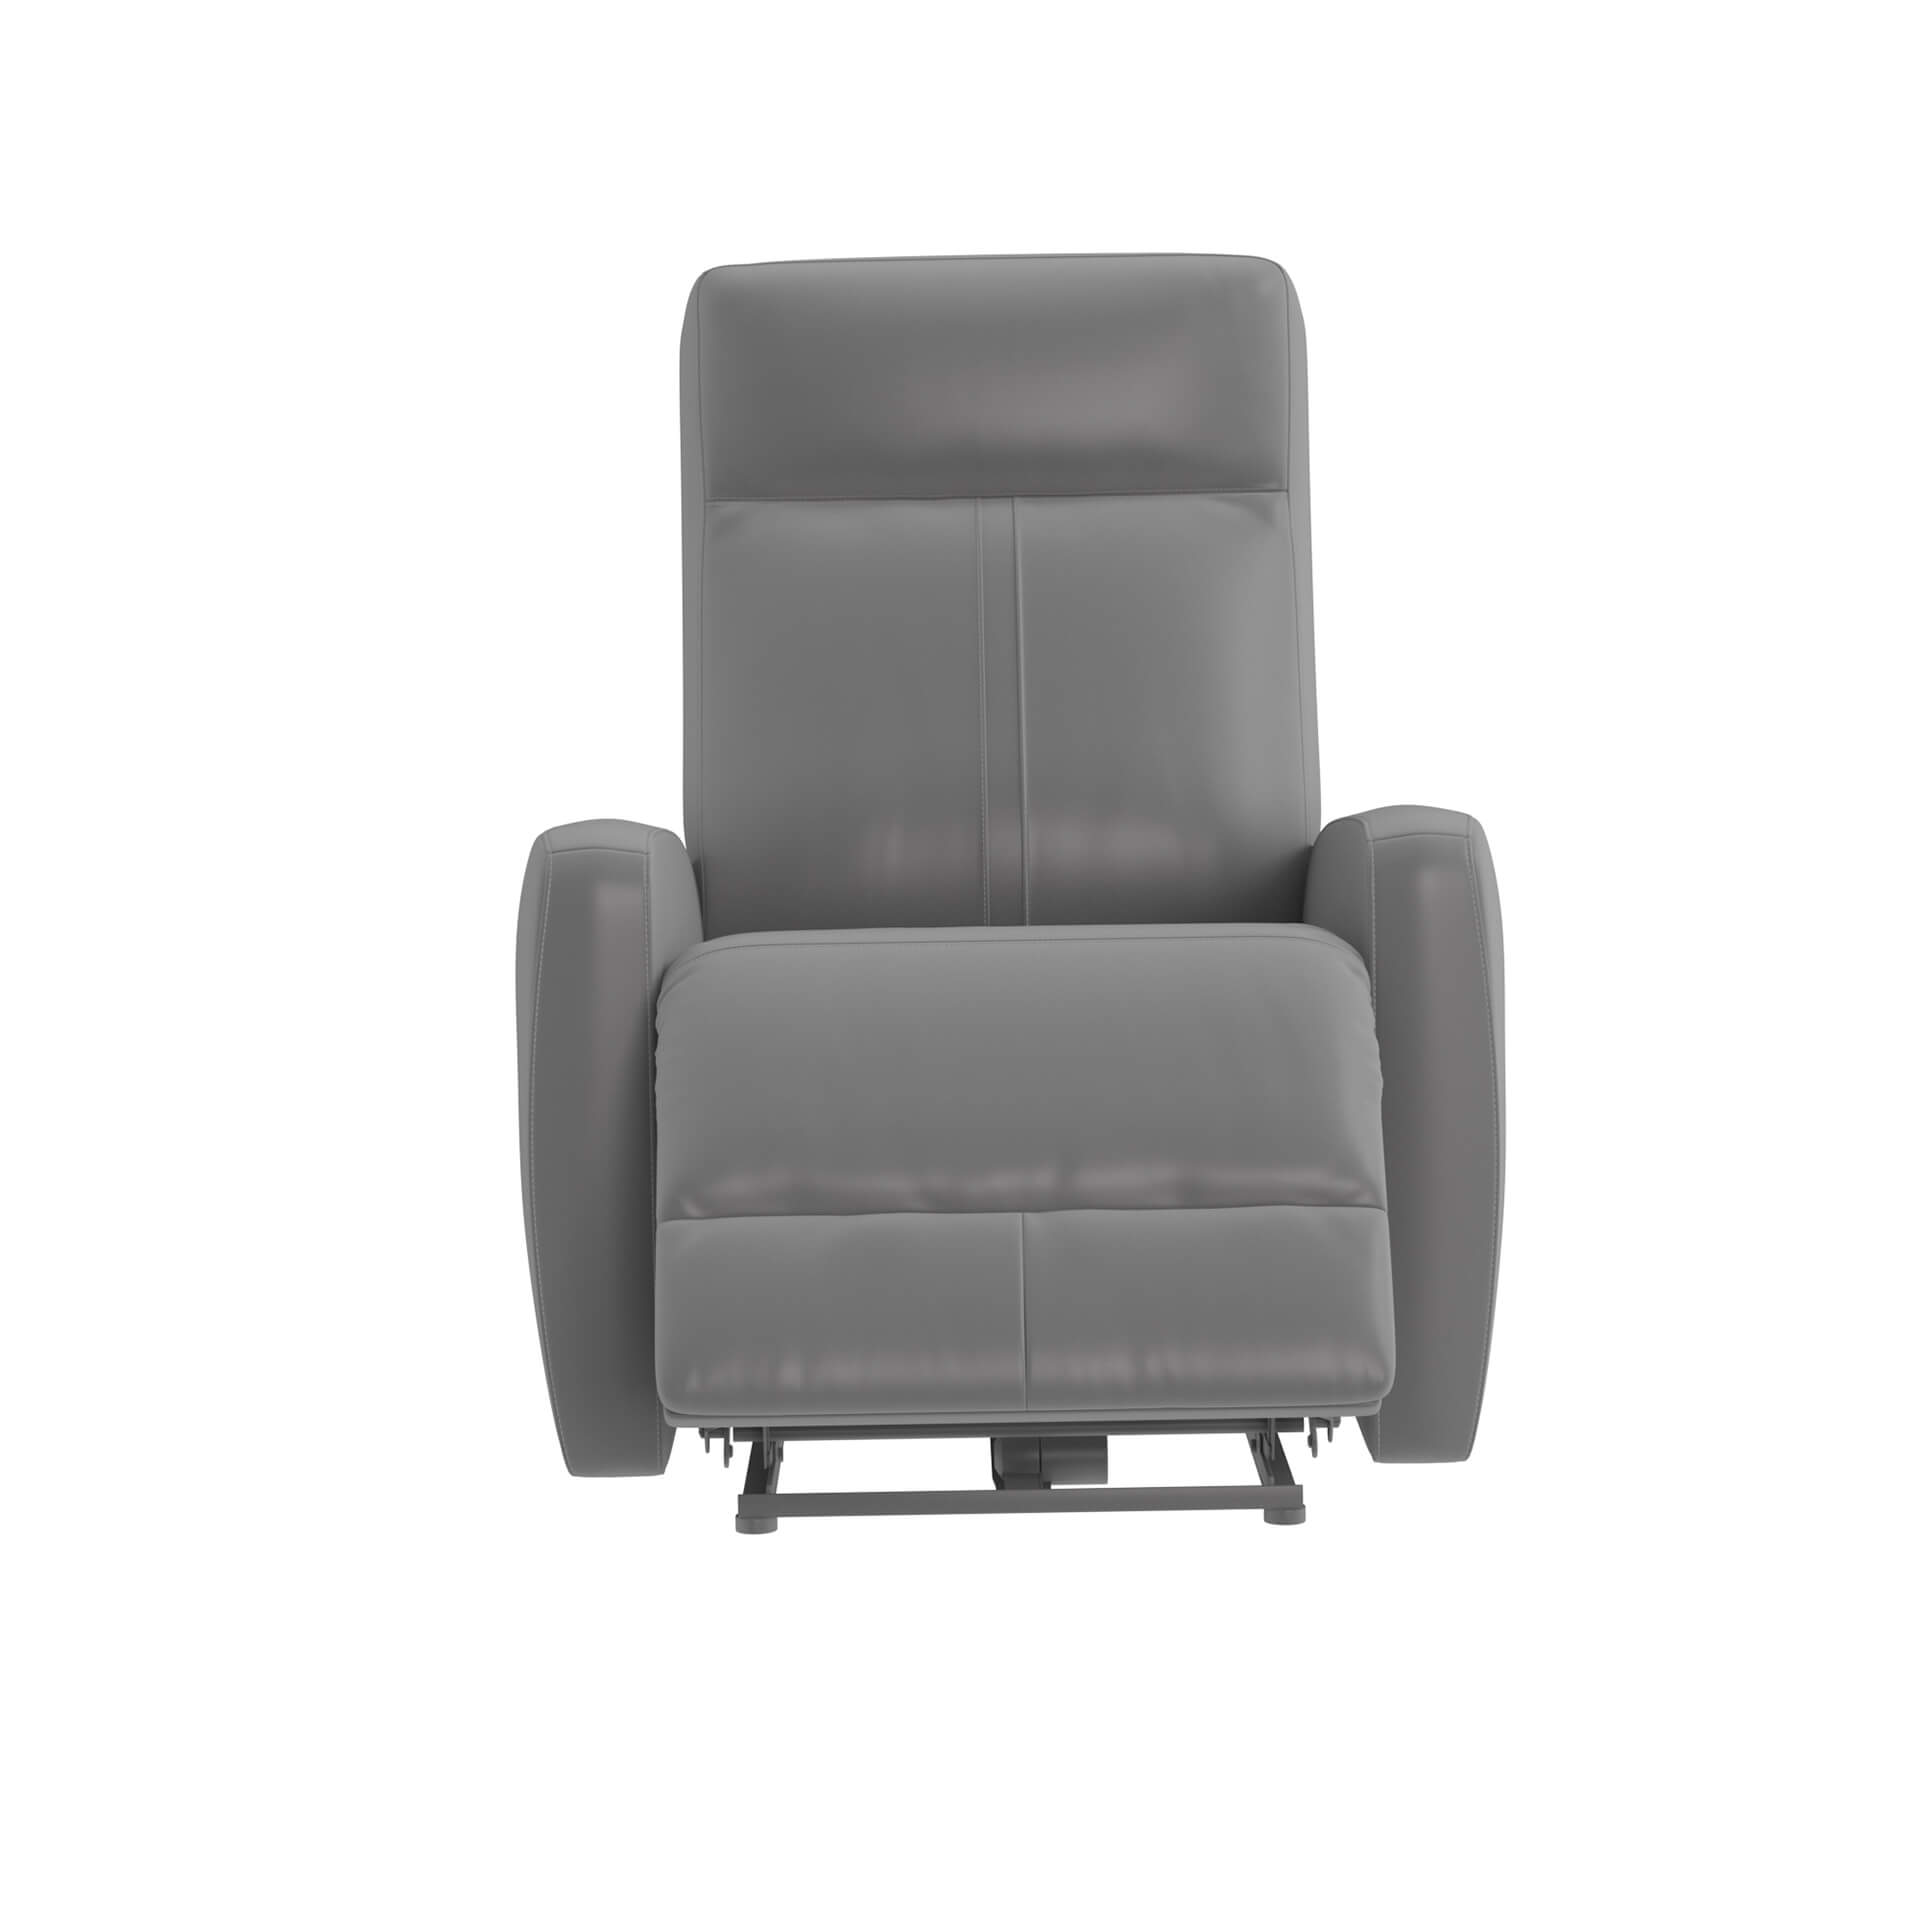 Front View of a Massage Armchair Model